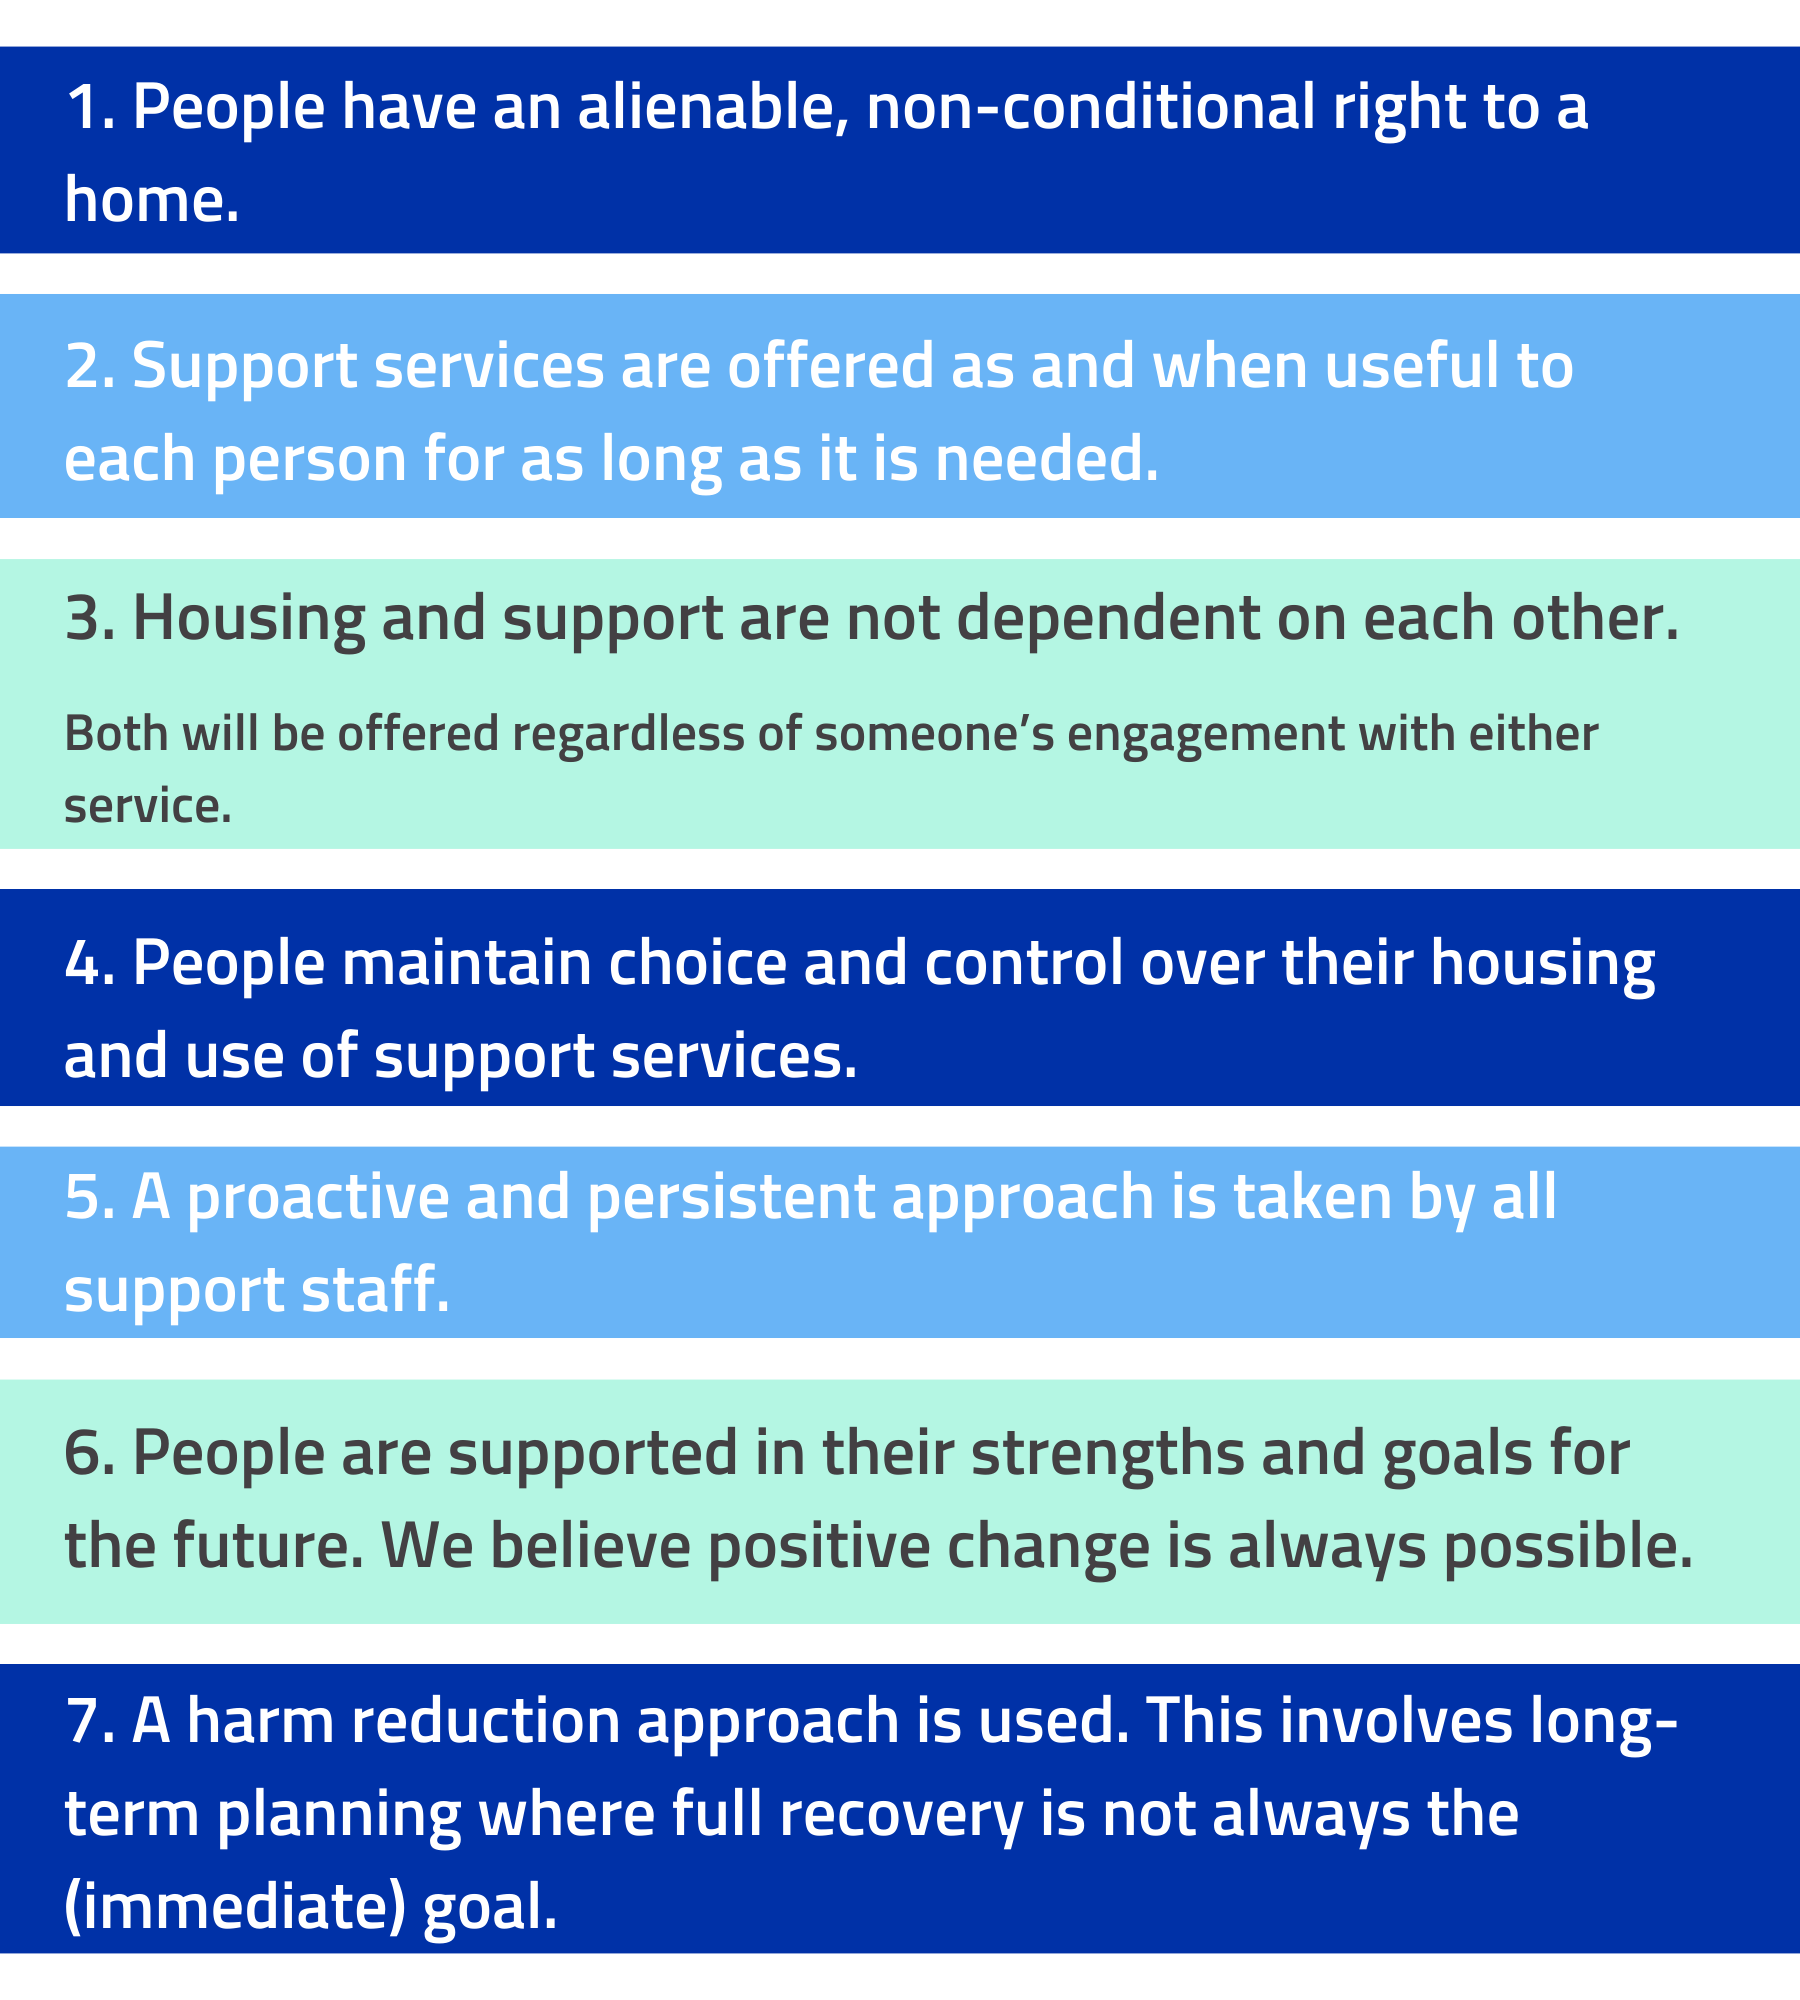 the 7 principles of a housing first apporch are listed here. they are: People have an alienable, non-conditional right to a home, Support services are offered as and when useful to each person for as long as it is needed, Housing and support are not dependent on each other, People maintain choice and control over their housing and use of support services, A proactive and persistent approach is taken by all support staff, People are supported in their strengths and goals for the future. We believe positive change is always possible,  A harm reduction approach is used. This involves long-term planning where full recovery is not always the (immediate) goal.